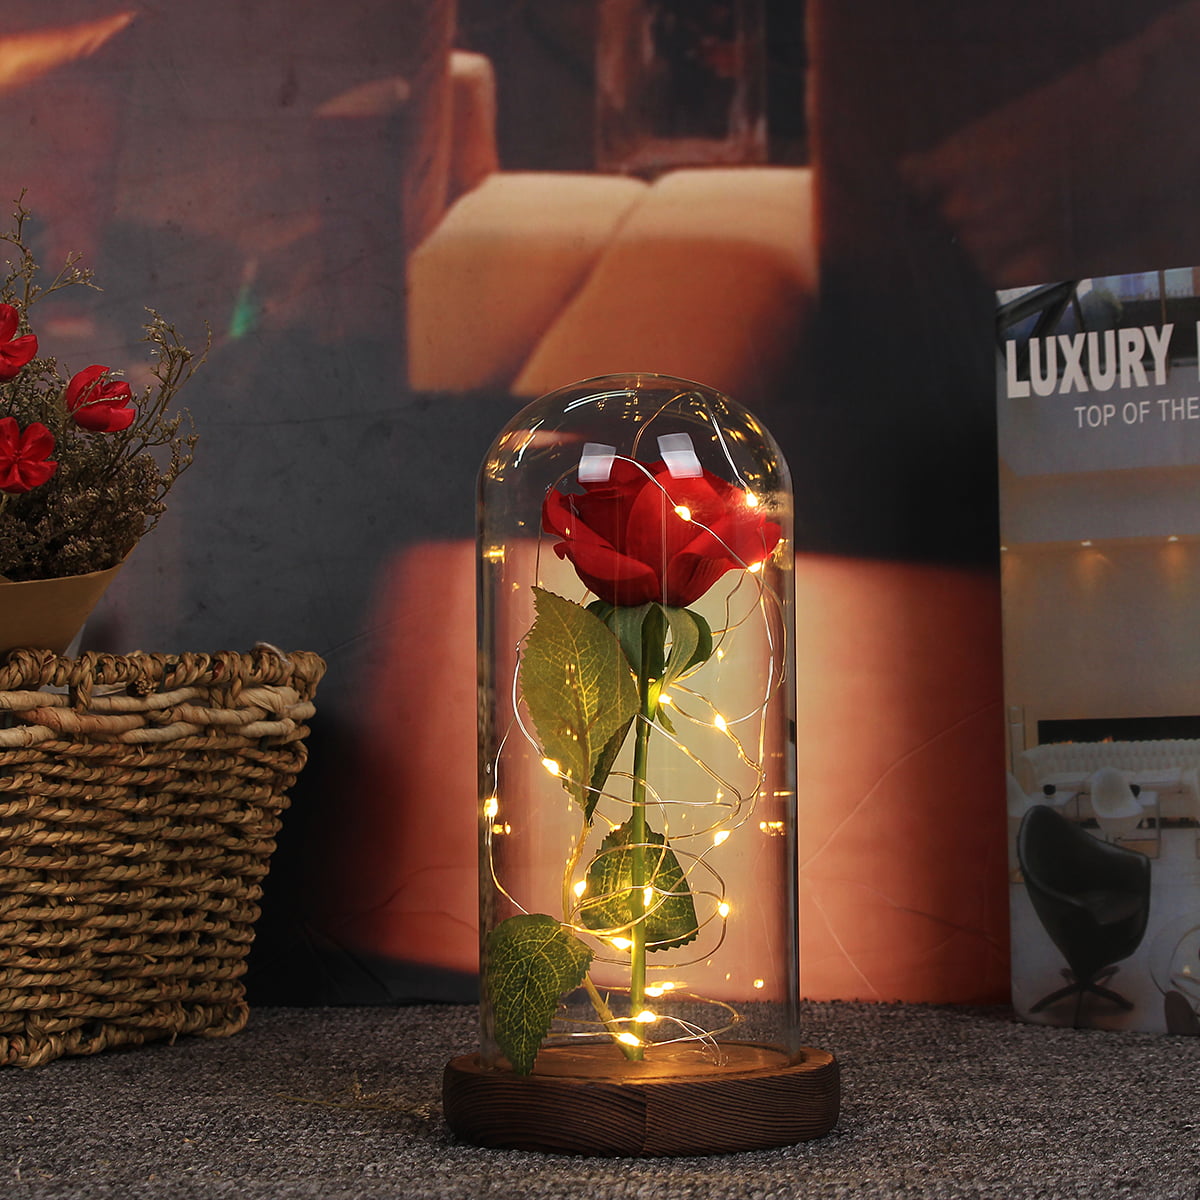 Details about   Artificial Rose Glass Cover LED Light Romantic Silk Flowers Bedroom Decor FR 